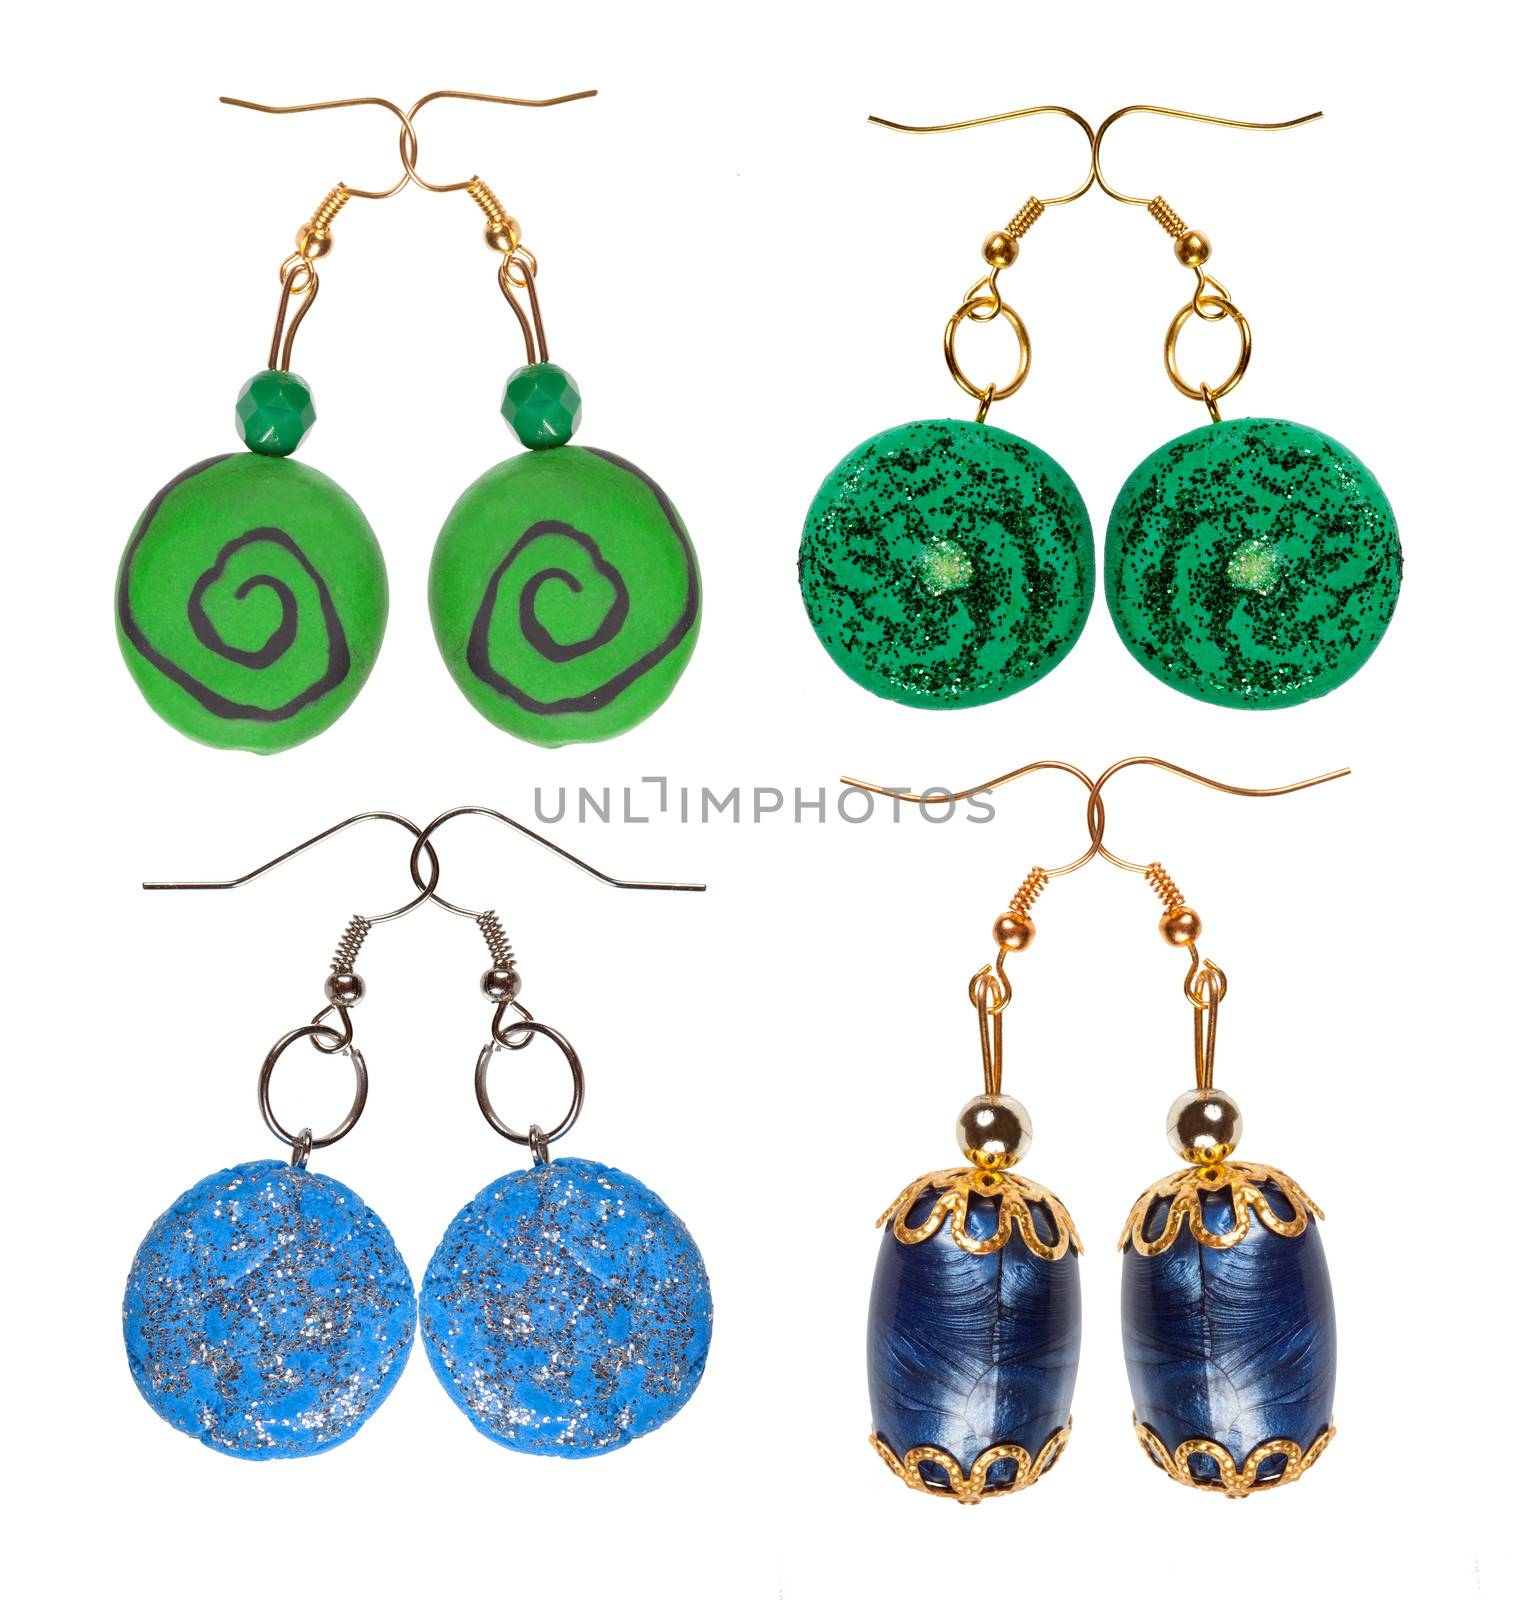 Earrings made of plastic and glass isolated on a white background. Four pairs blue and green. Collage.